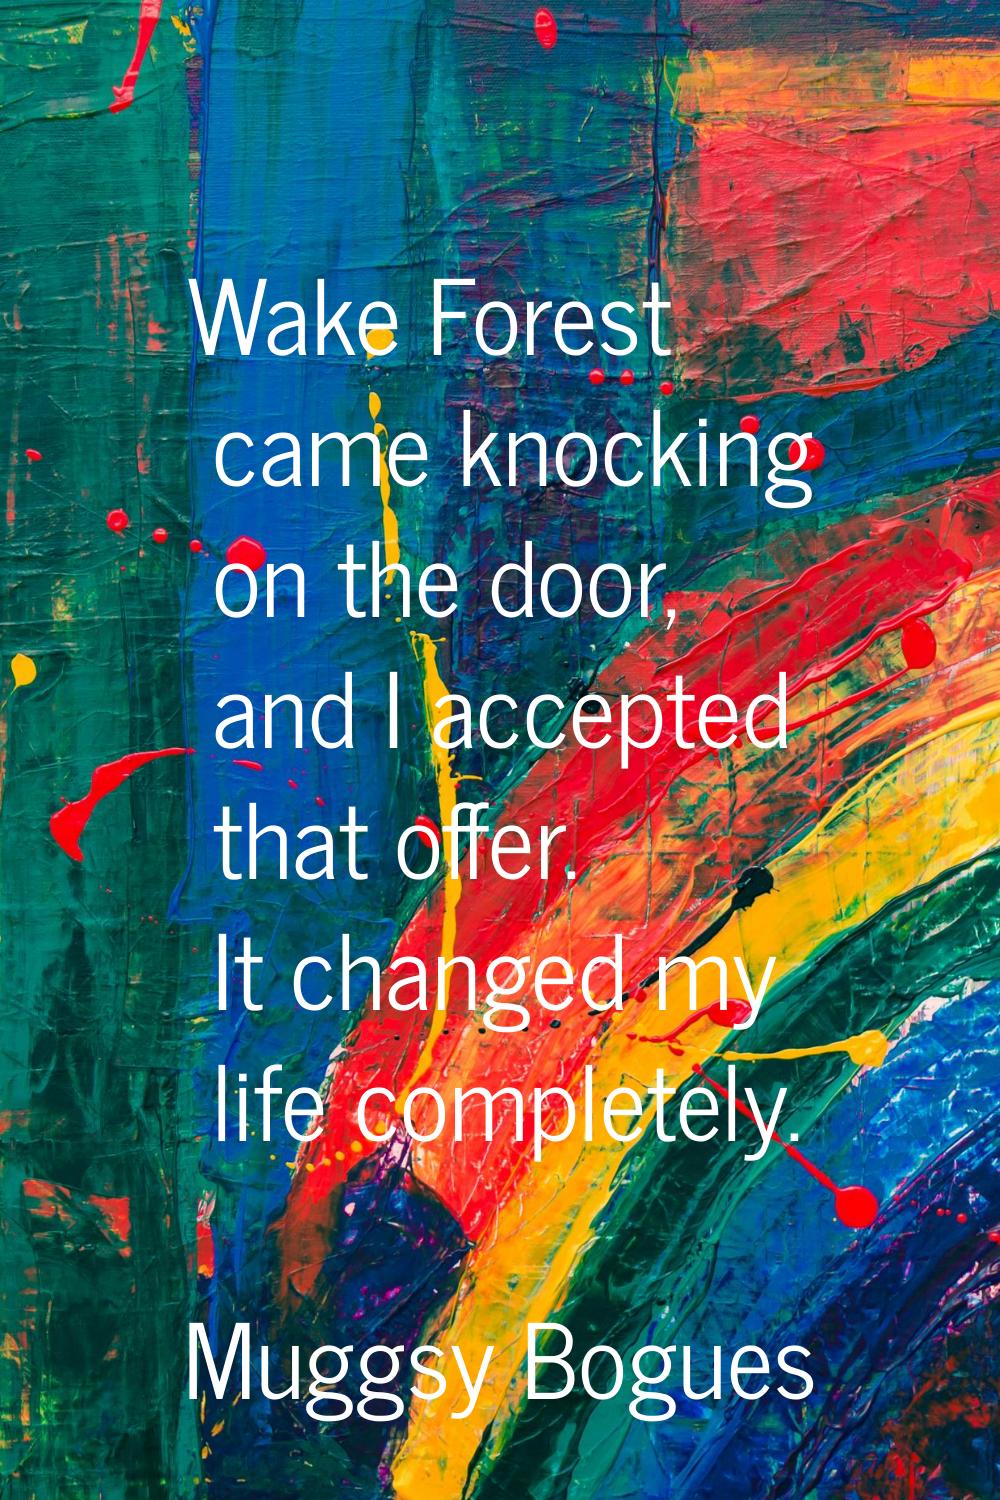 Wake Forest came knocking on the door, and I accepted that offer. It changed my life completely.